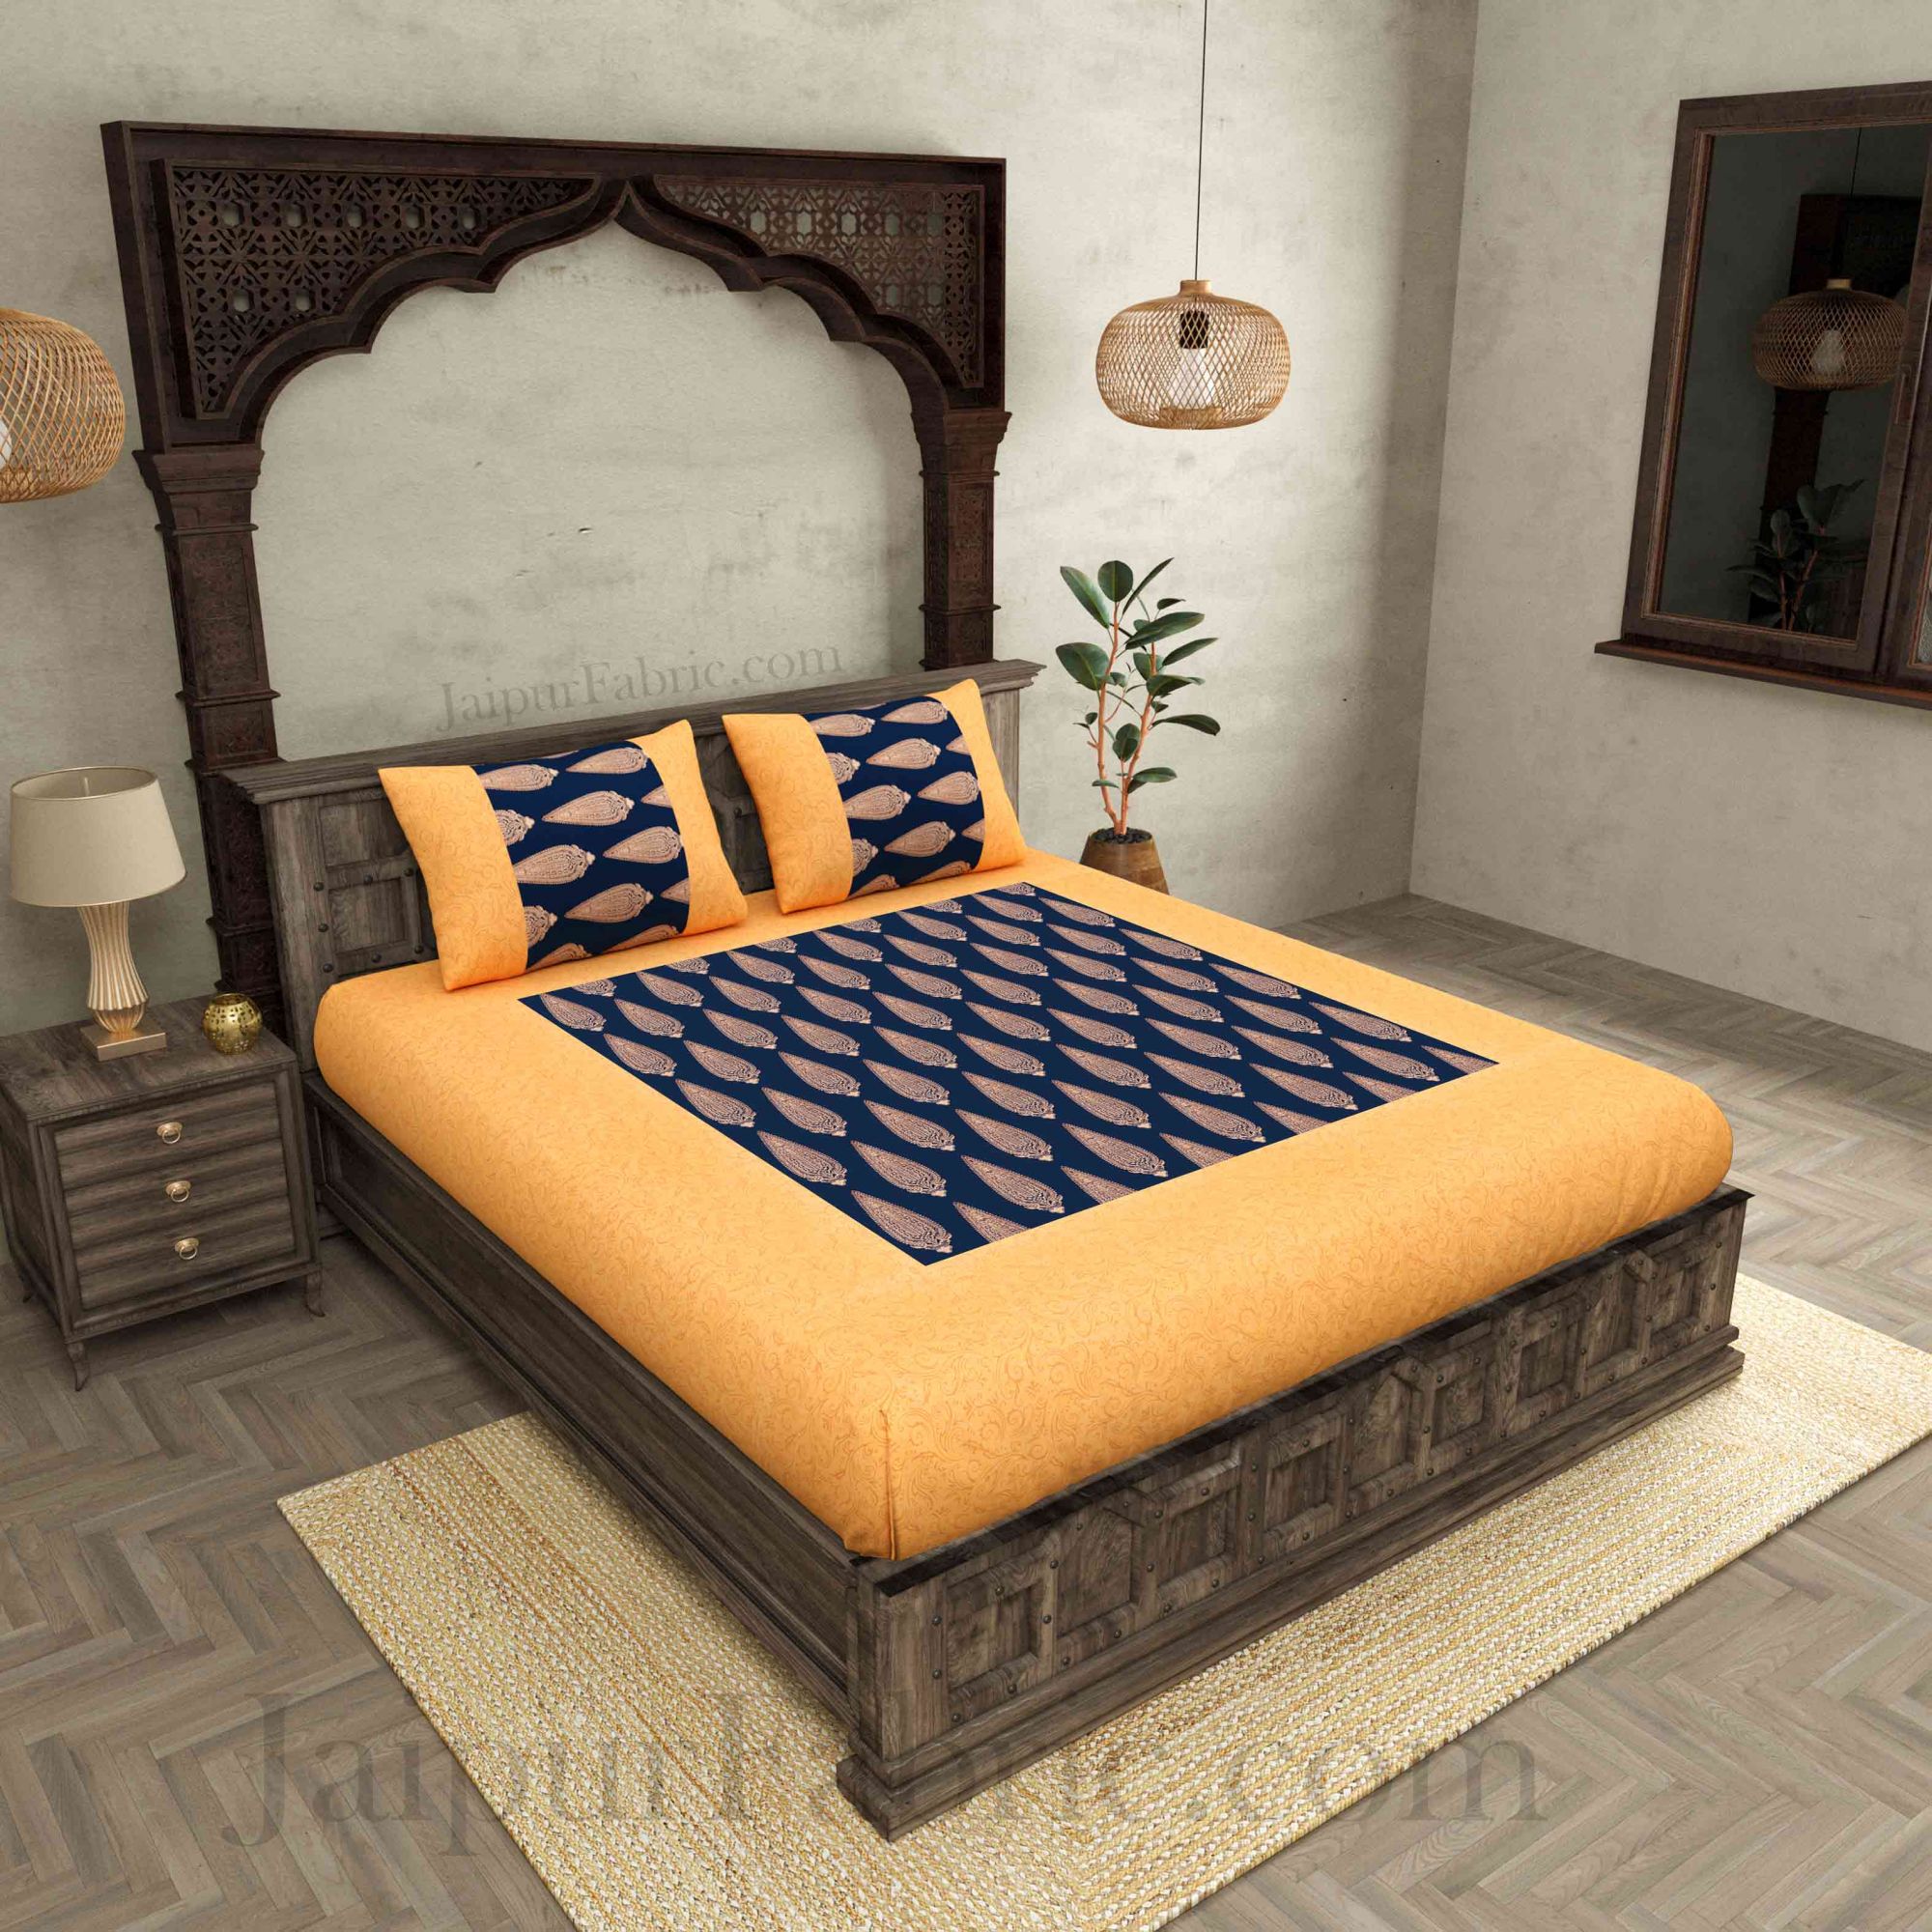 Patola BedSheet in Navy Blue Base Cream Border Gold Print Kerry Pattern Super Fine Cotton with 2 pillow covers